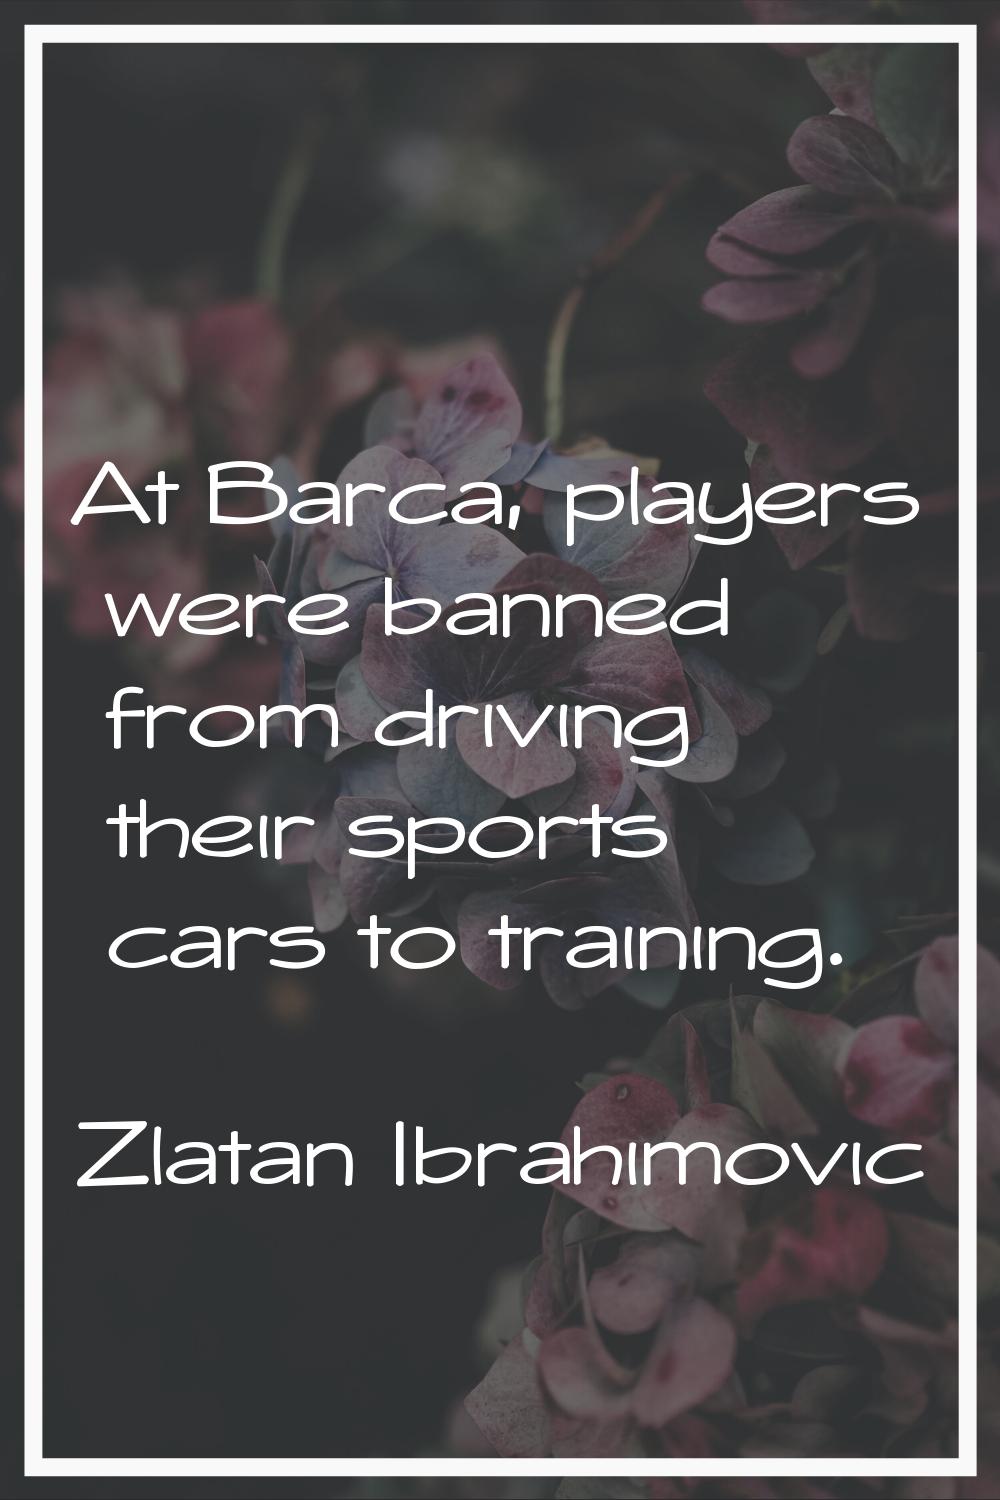 At Barca, players were banned from driving their sports cars to training.